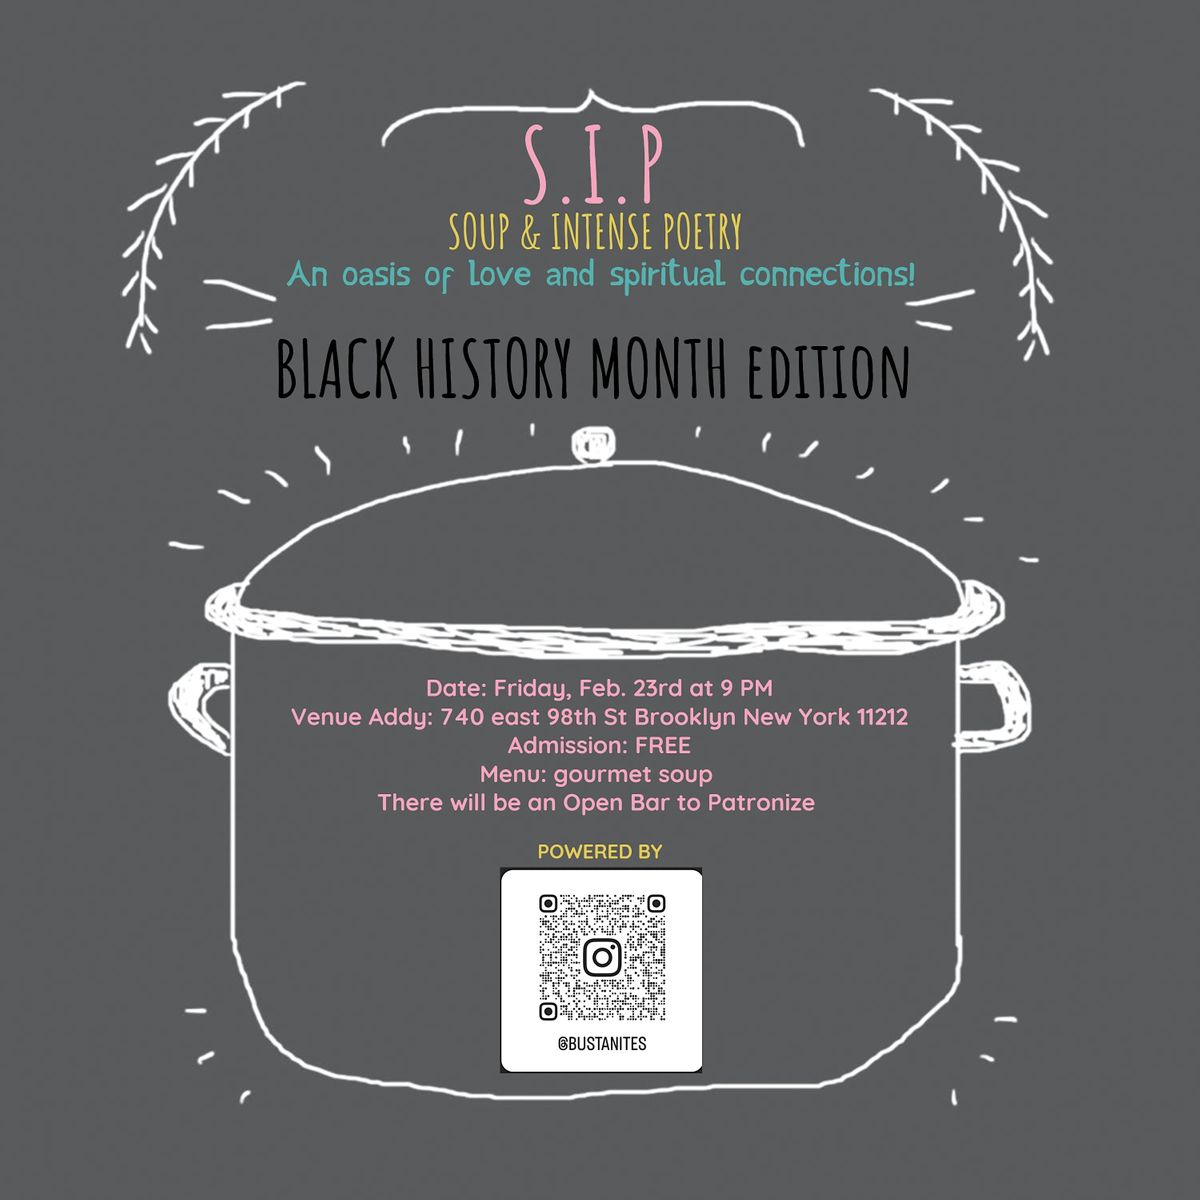 S.I.P     SOUP & INTENSE POETRY- BLACK HISTORY MONTH EDITION